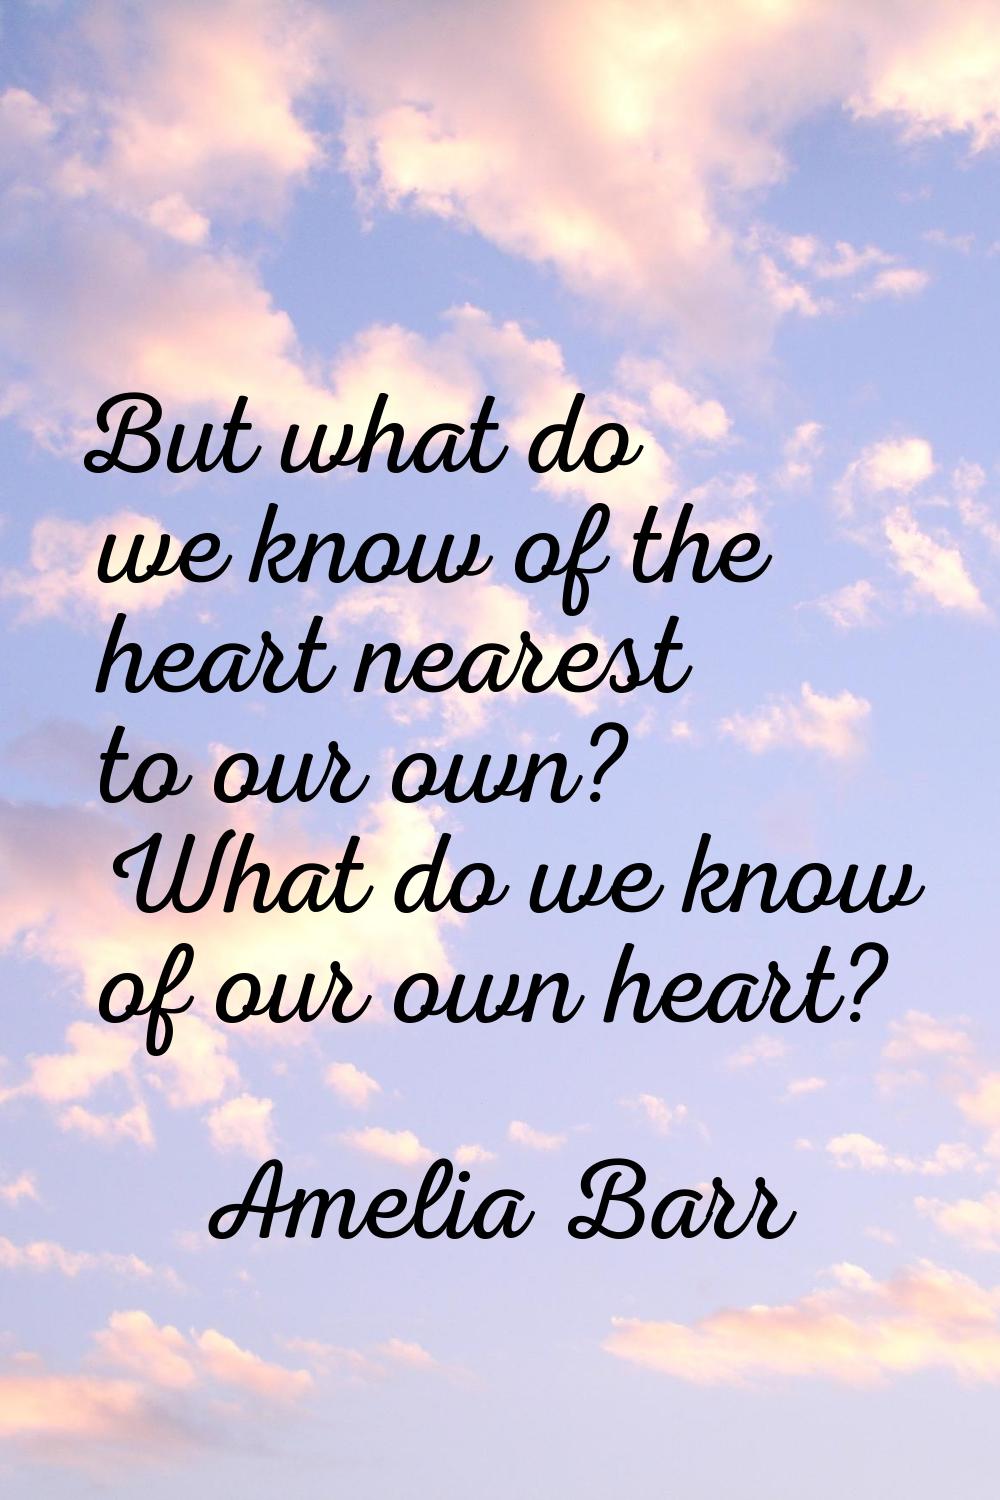 But what do we know of the heart nearest to our own? What do we know of our own heart?